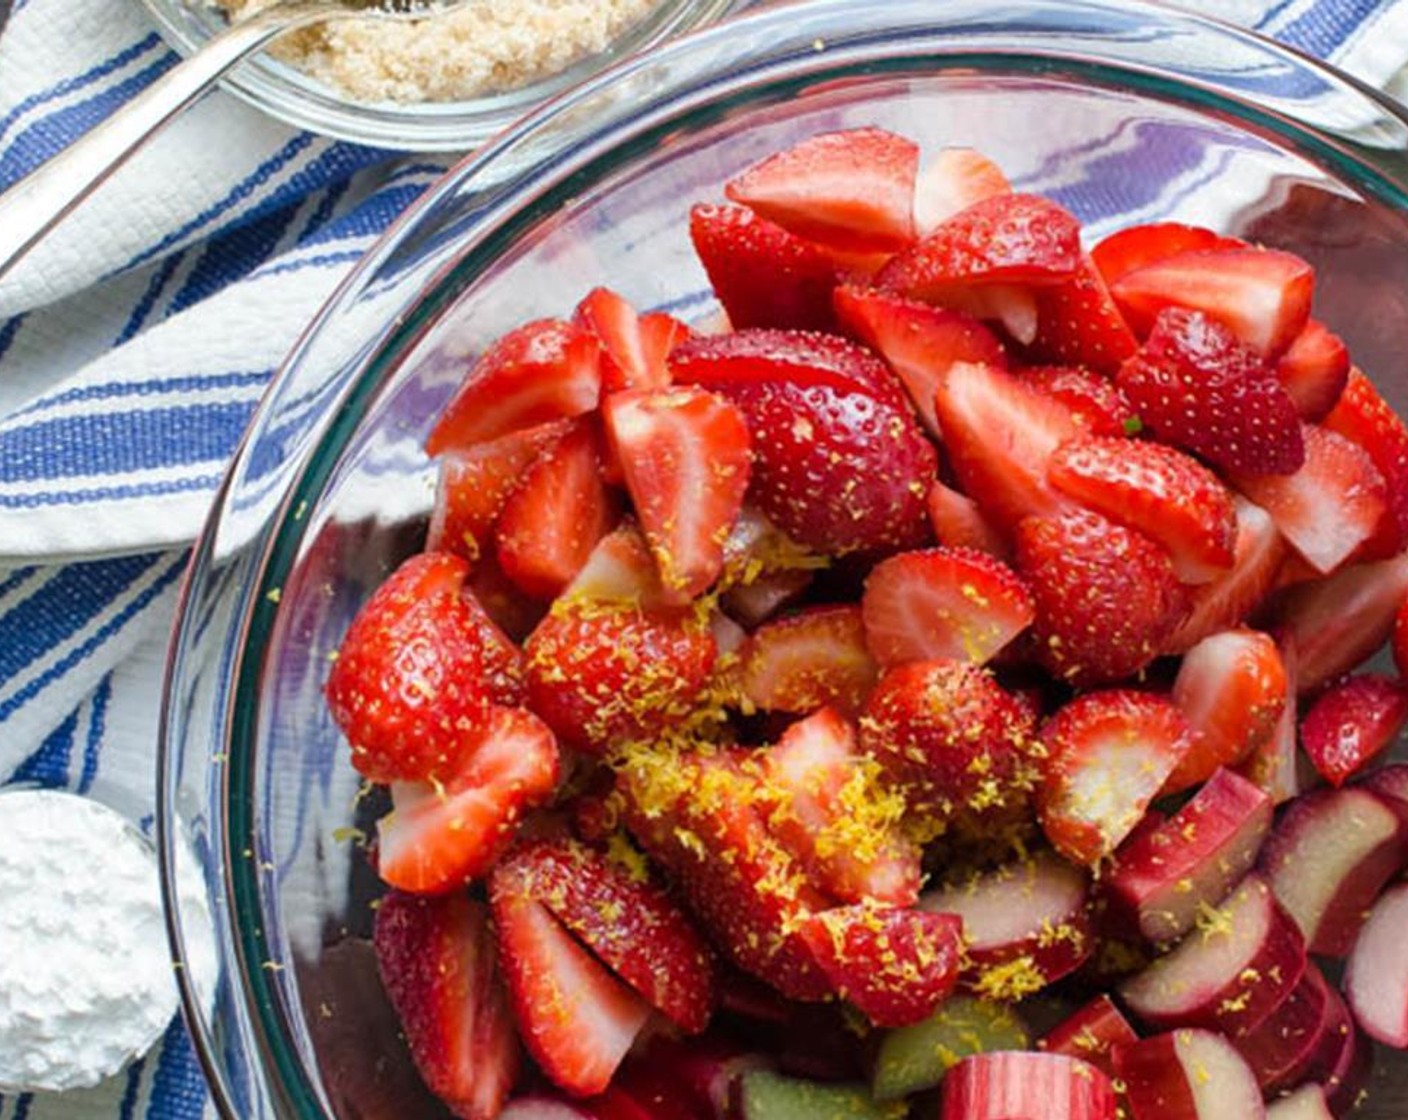 step 2 In a large bowl, combine the Rhubarb (1.5 lb), Fresh Strawberries (4 cups), Brown Sugar (1/4 cup), Granulated Sugar (1/4 cup), Arrowroot Starch (1/4 cup), Salt (1/4 tsp), and zest and juice from Lemon (1). Toss to combine.